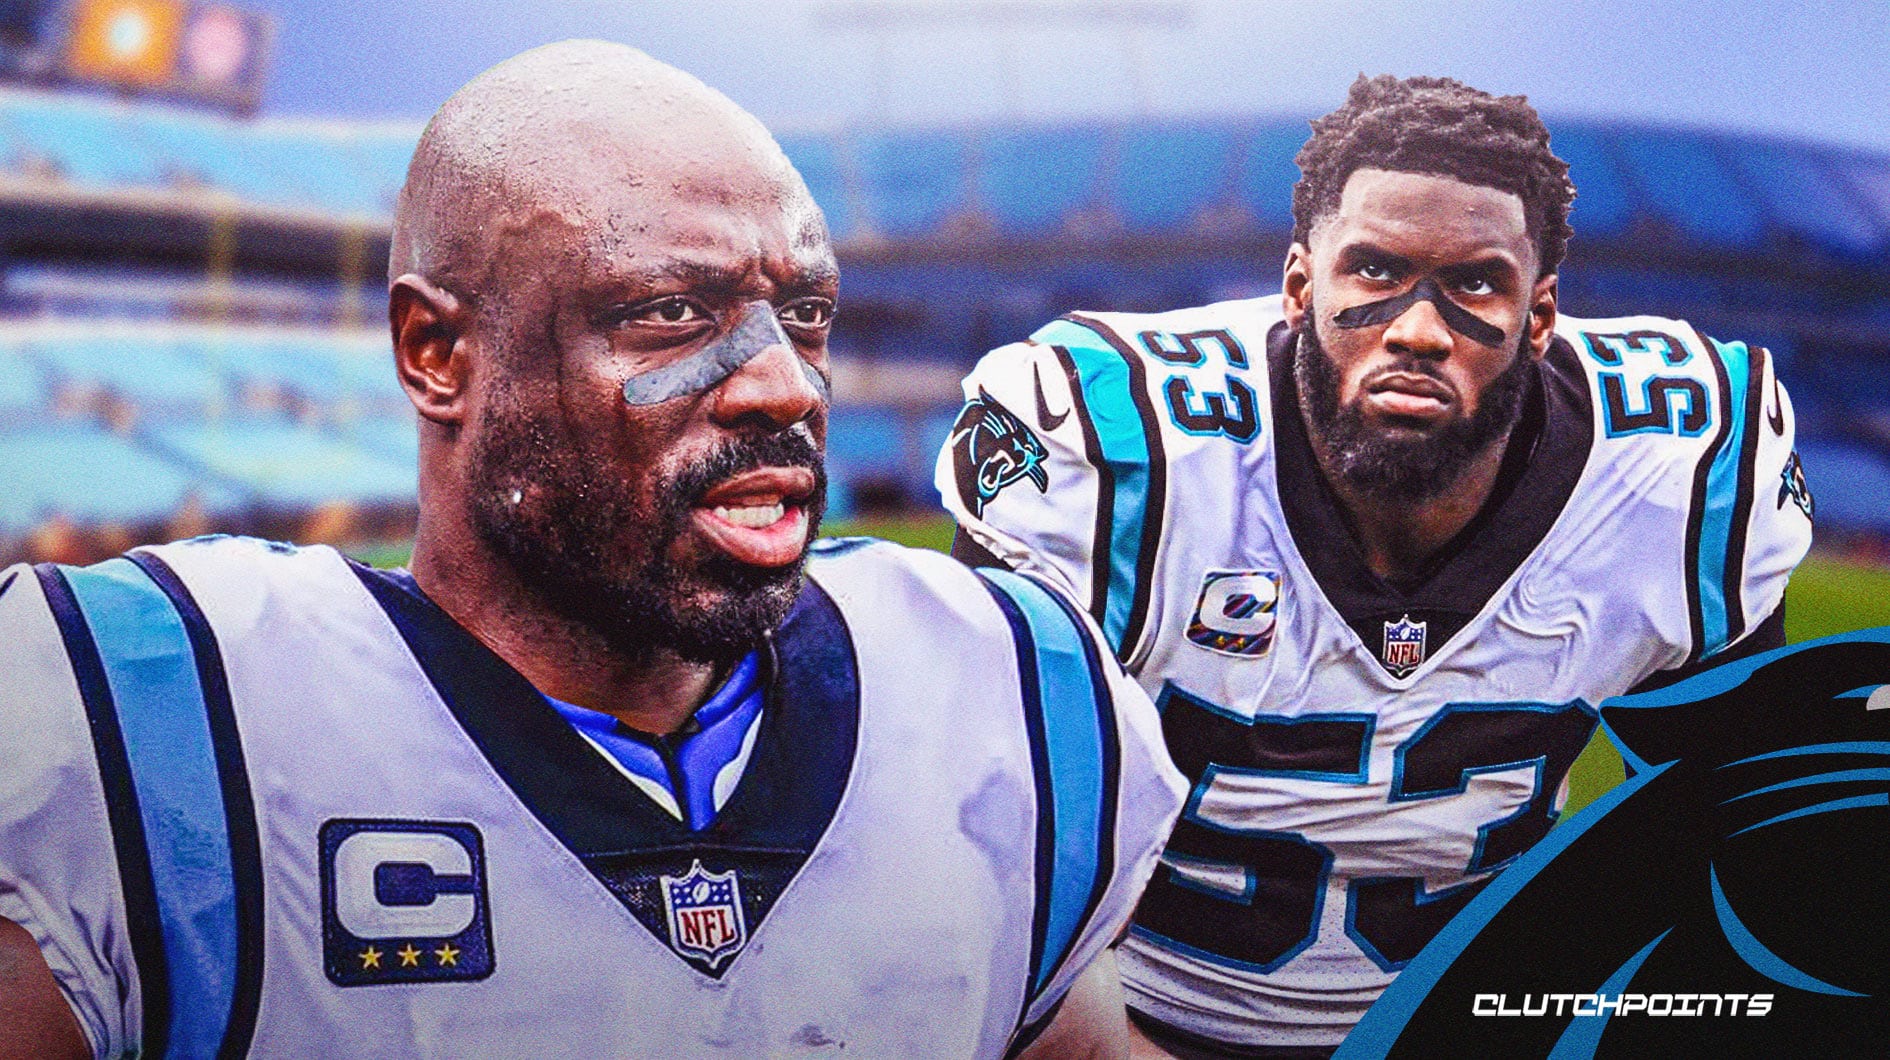 Panthers: Justin Houston looking forward to teaming up with Brian Burns